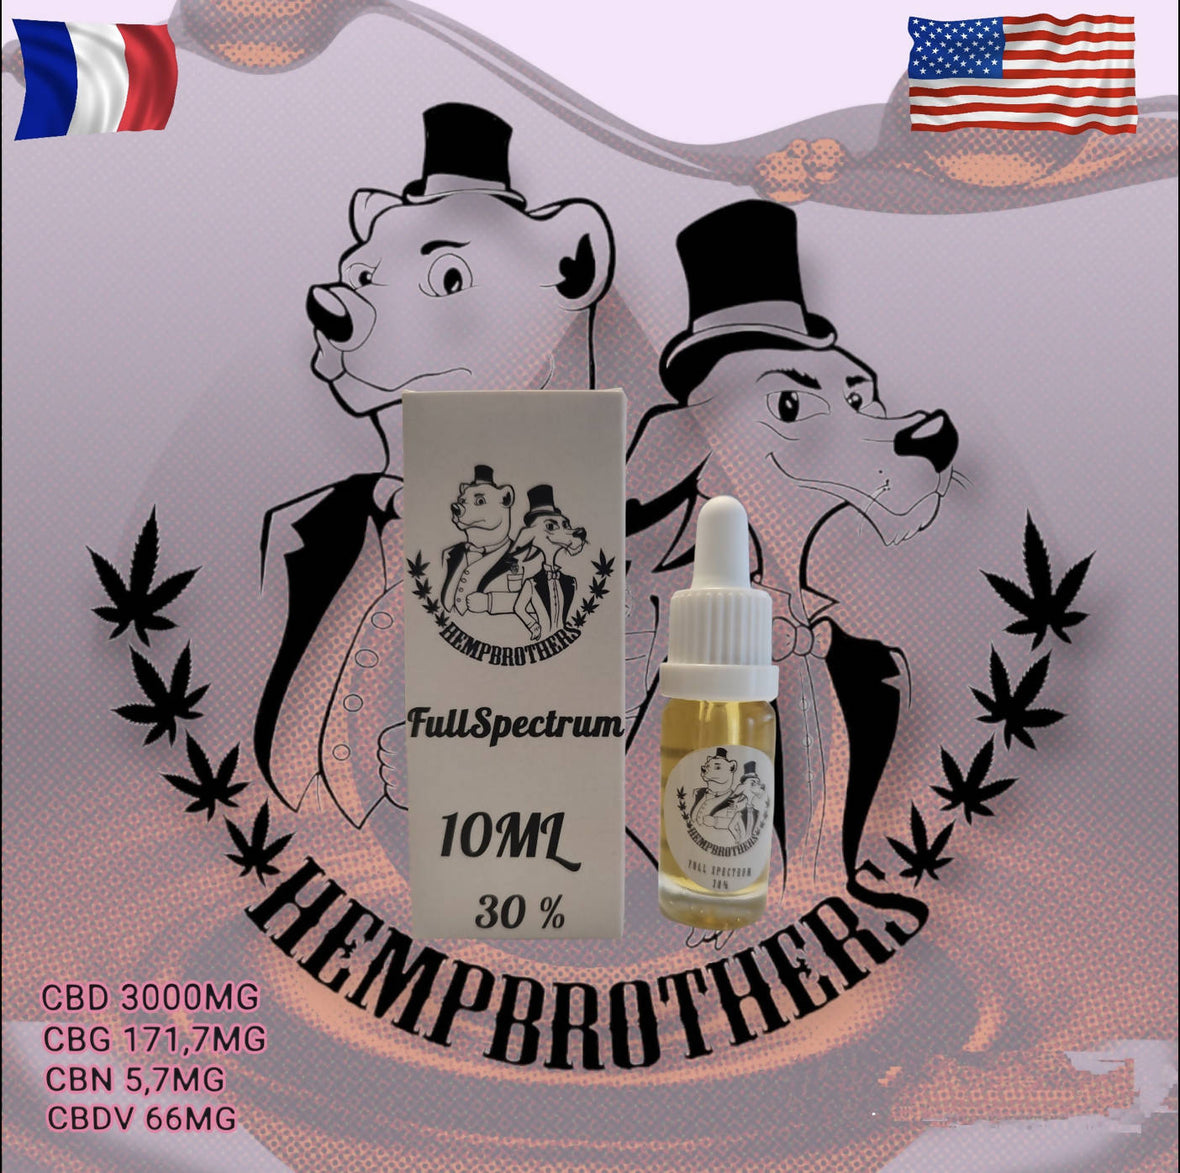 HUILE "ⓒBD" 30% (3000MG) “Hempbrothers”- SPECTRE COMPLET – 10ML